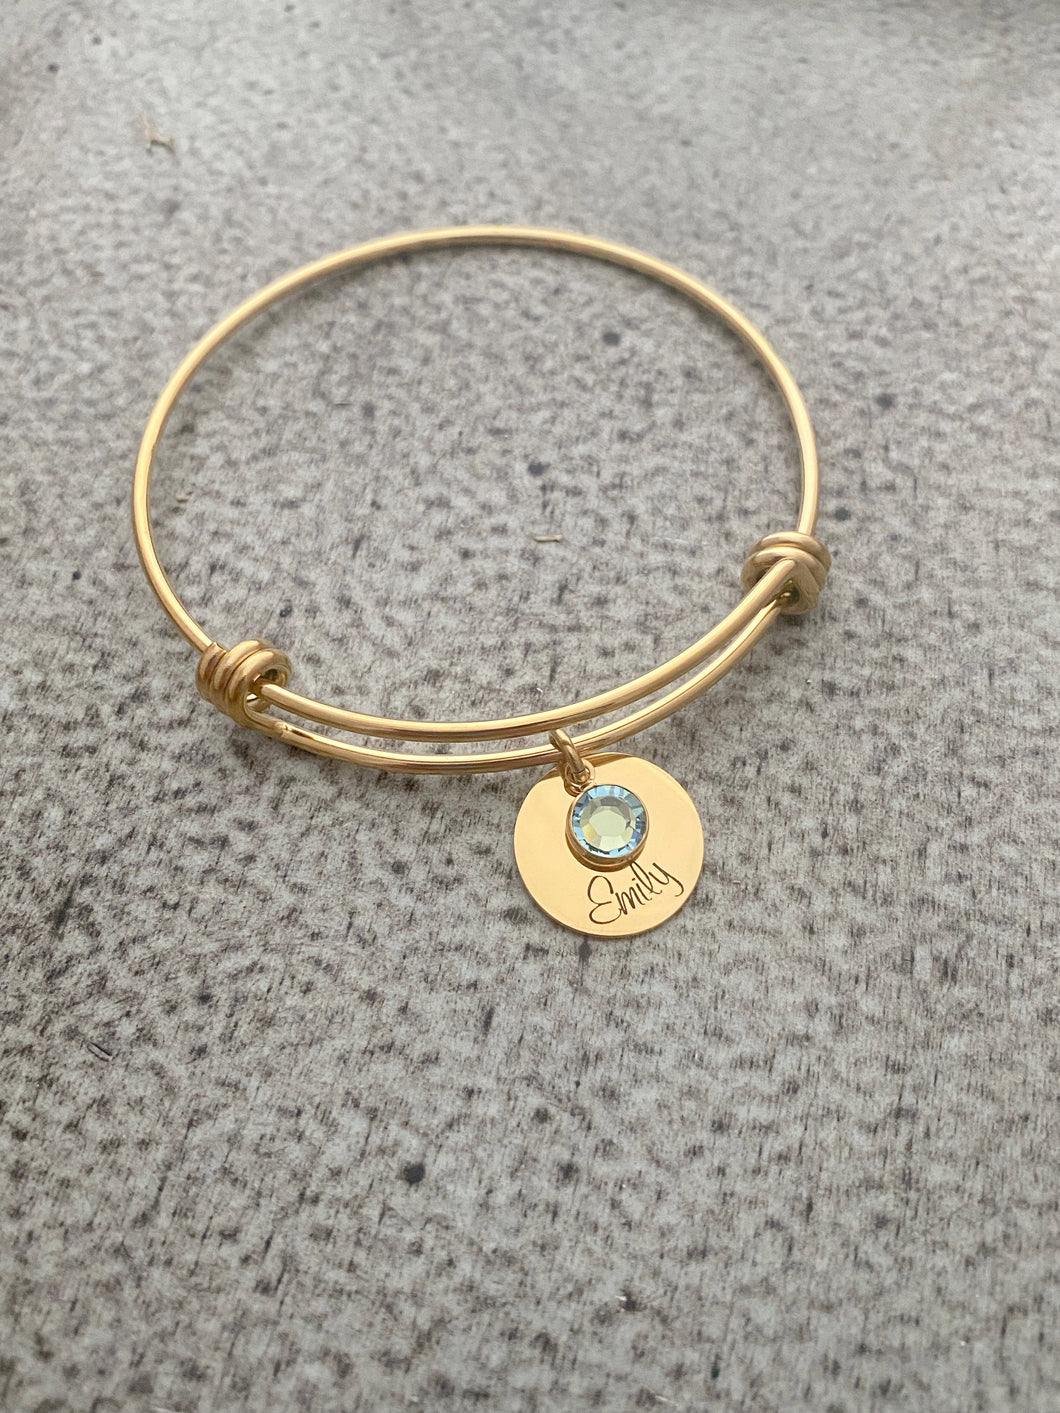 Engraved personalized name bracelet - gold stainless steel Name disc  Swarovski crystal birthstone - Mother's Day gift for Mom